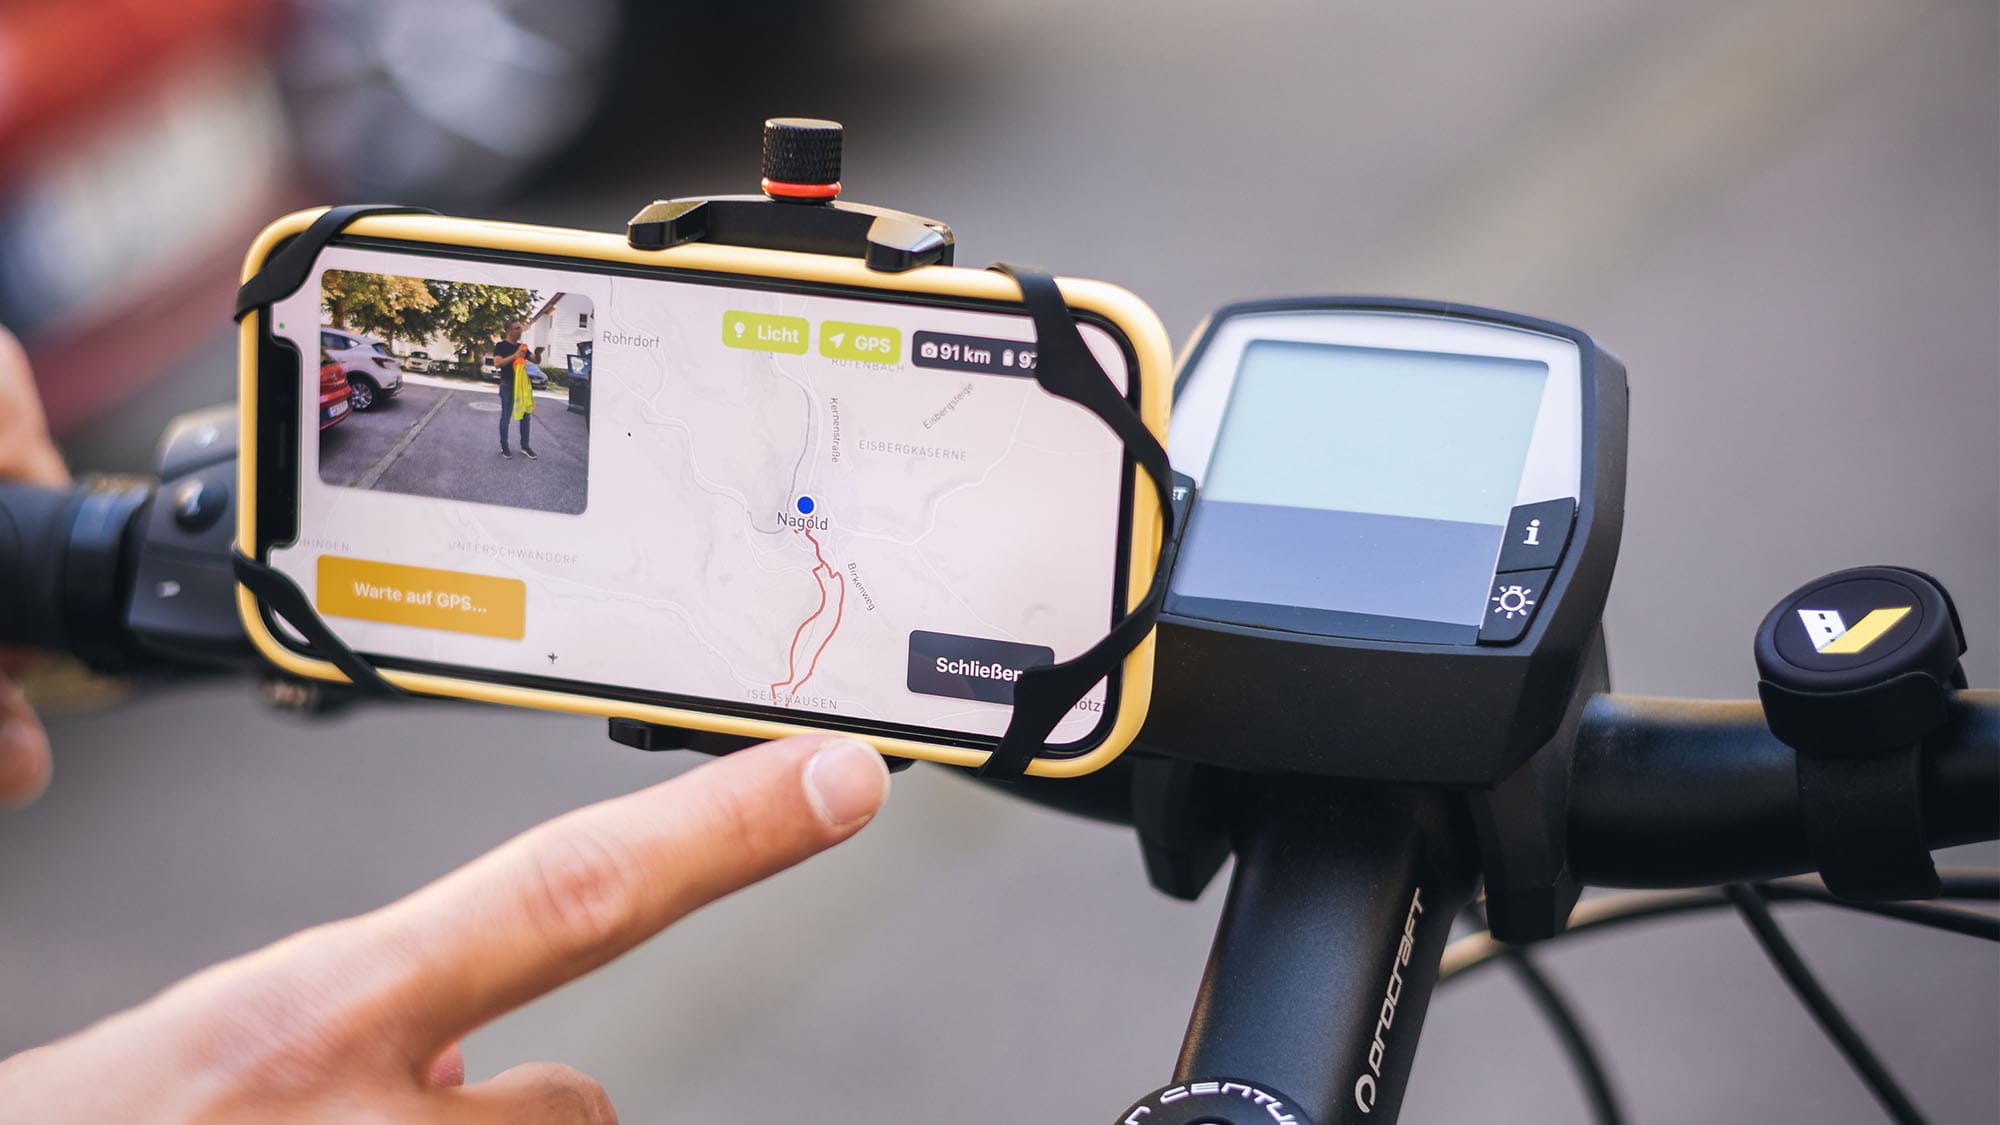 A smartphone in a holder on a bike steering wheel. the road management system is opend an ready to track bicycle paths